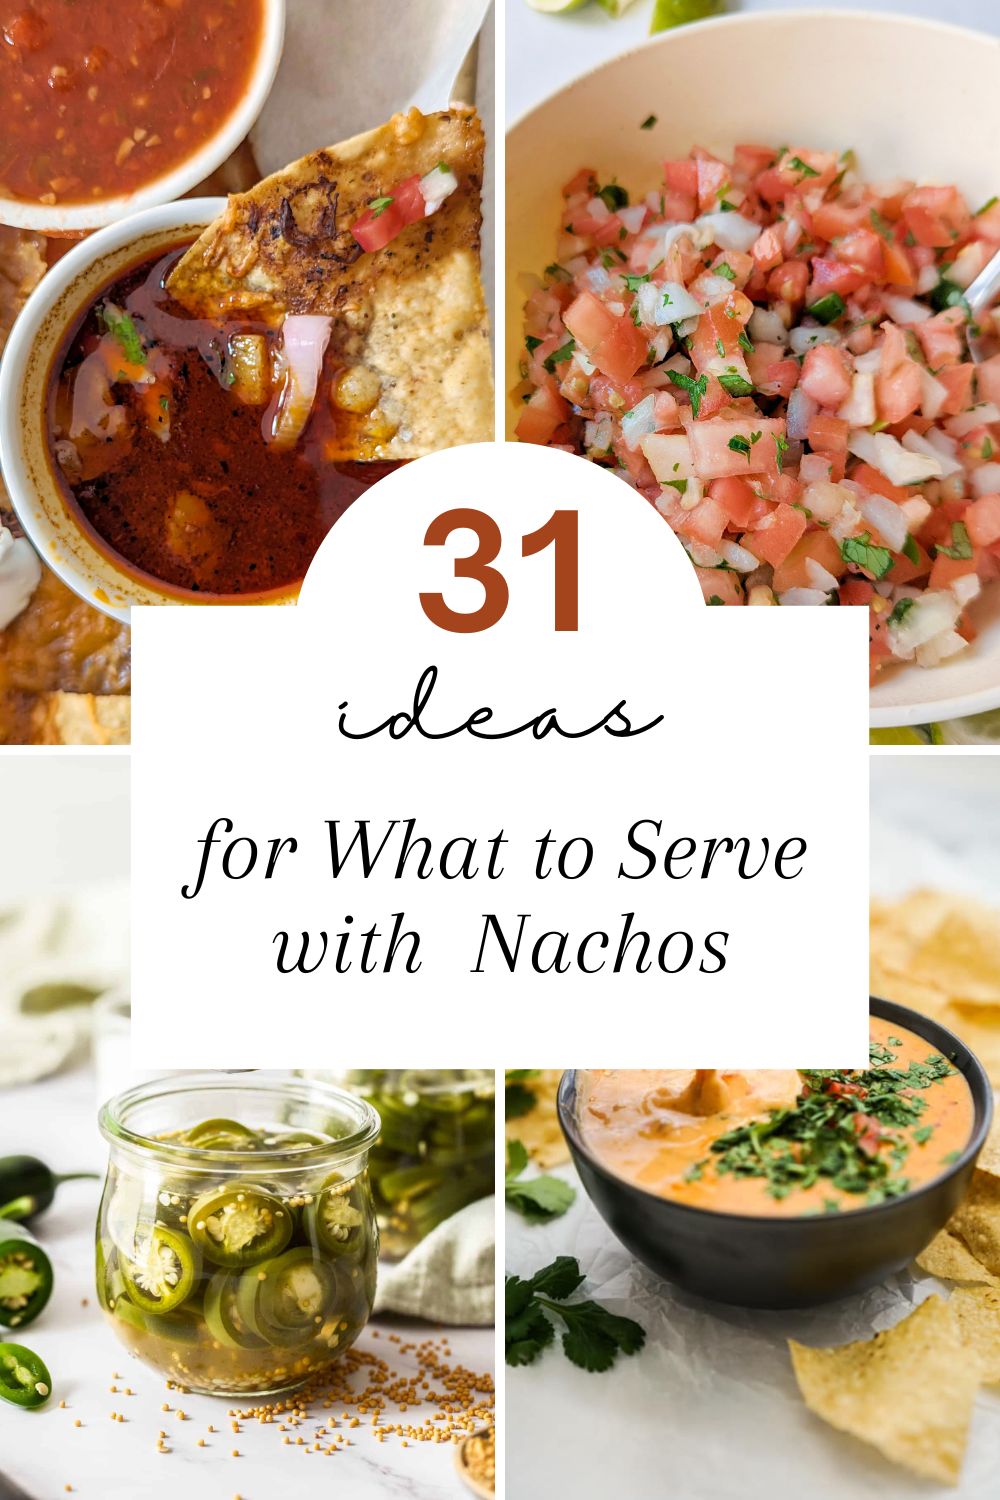 A pinterest pin of sides for what to serve with nachos.